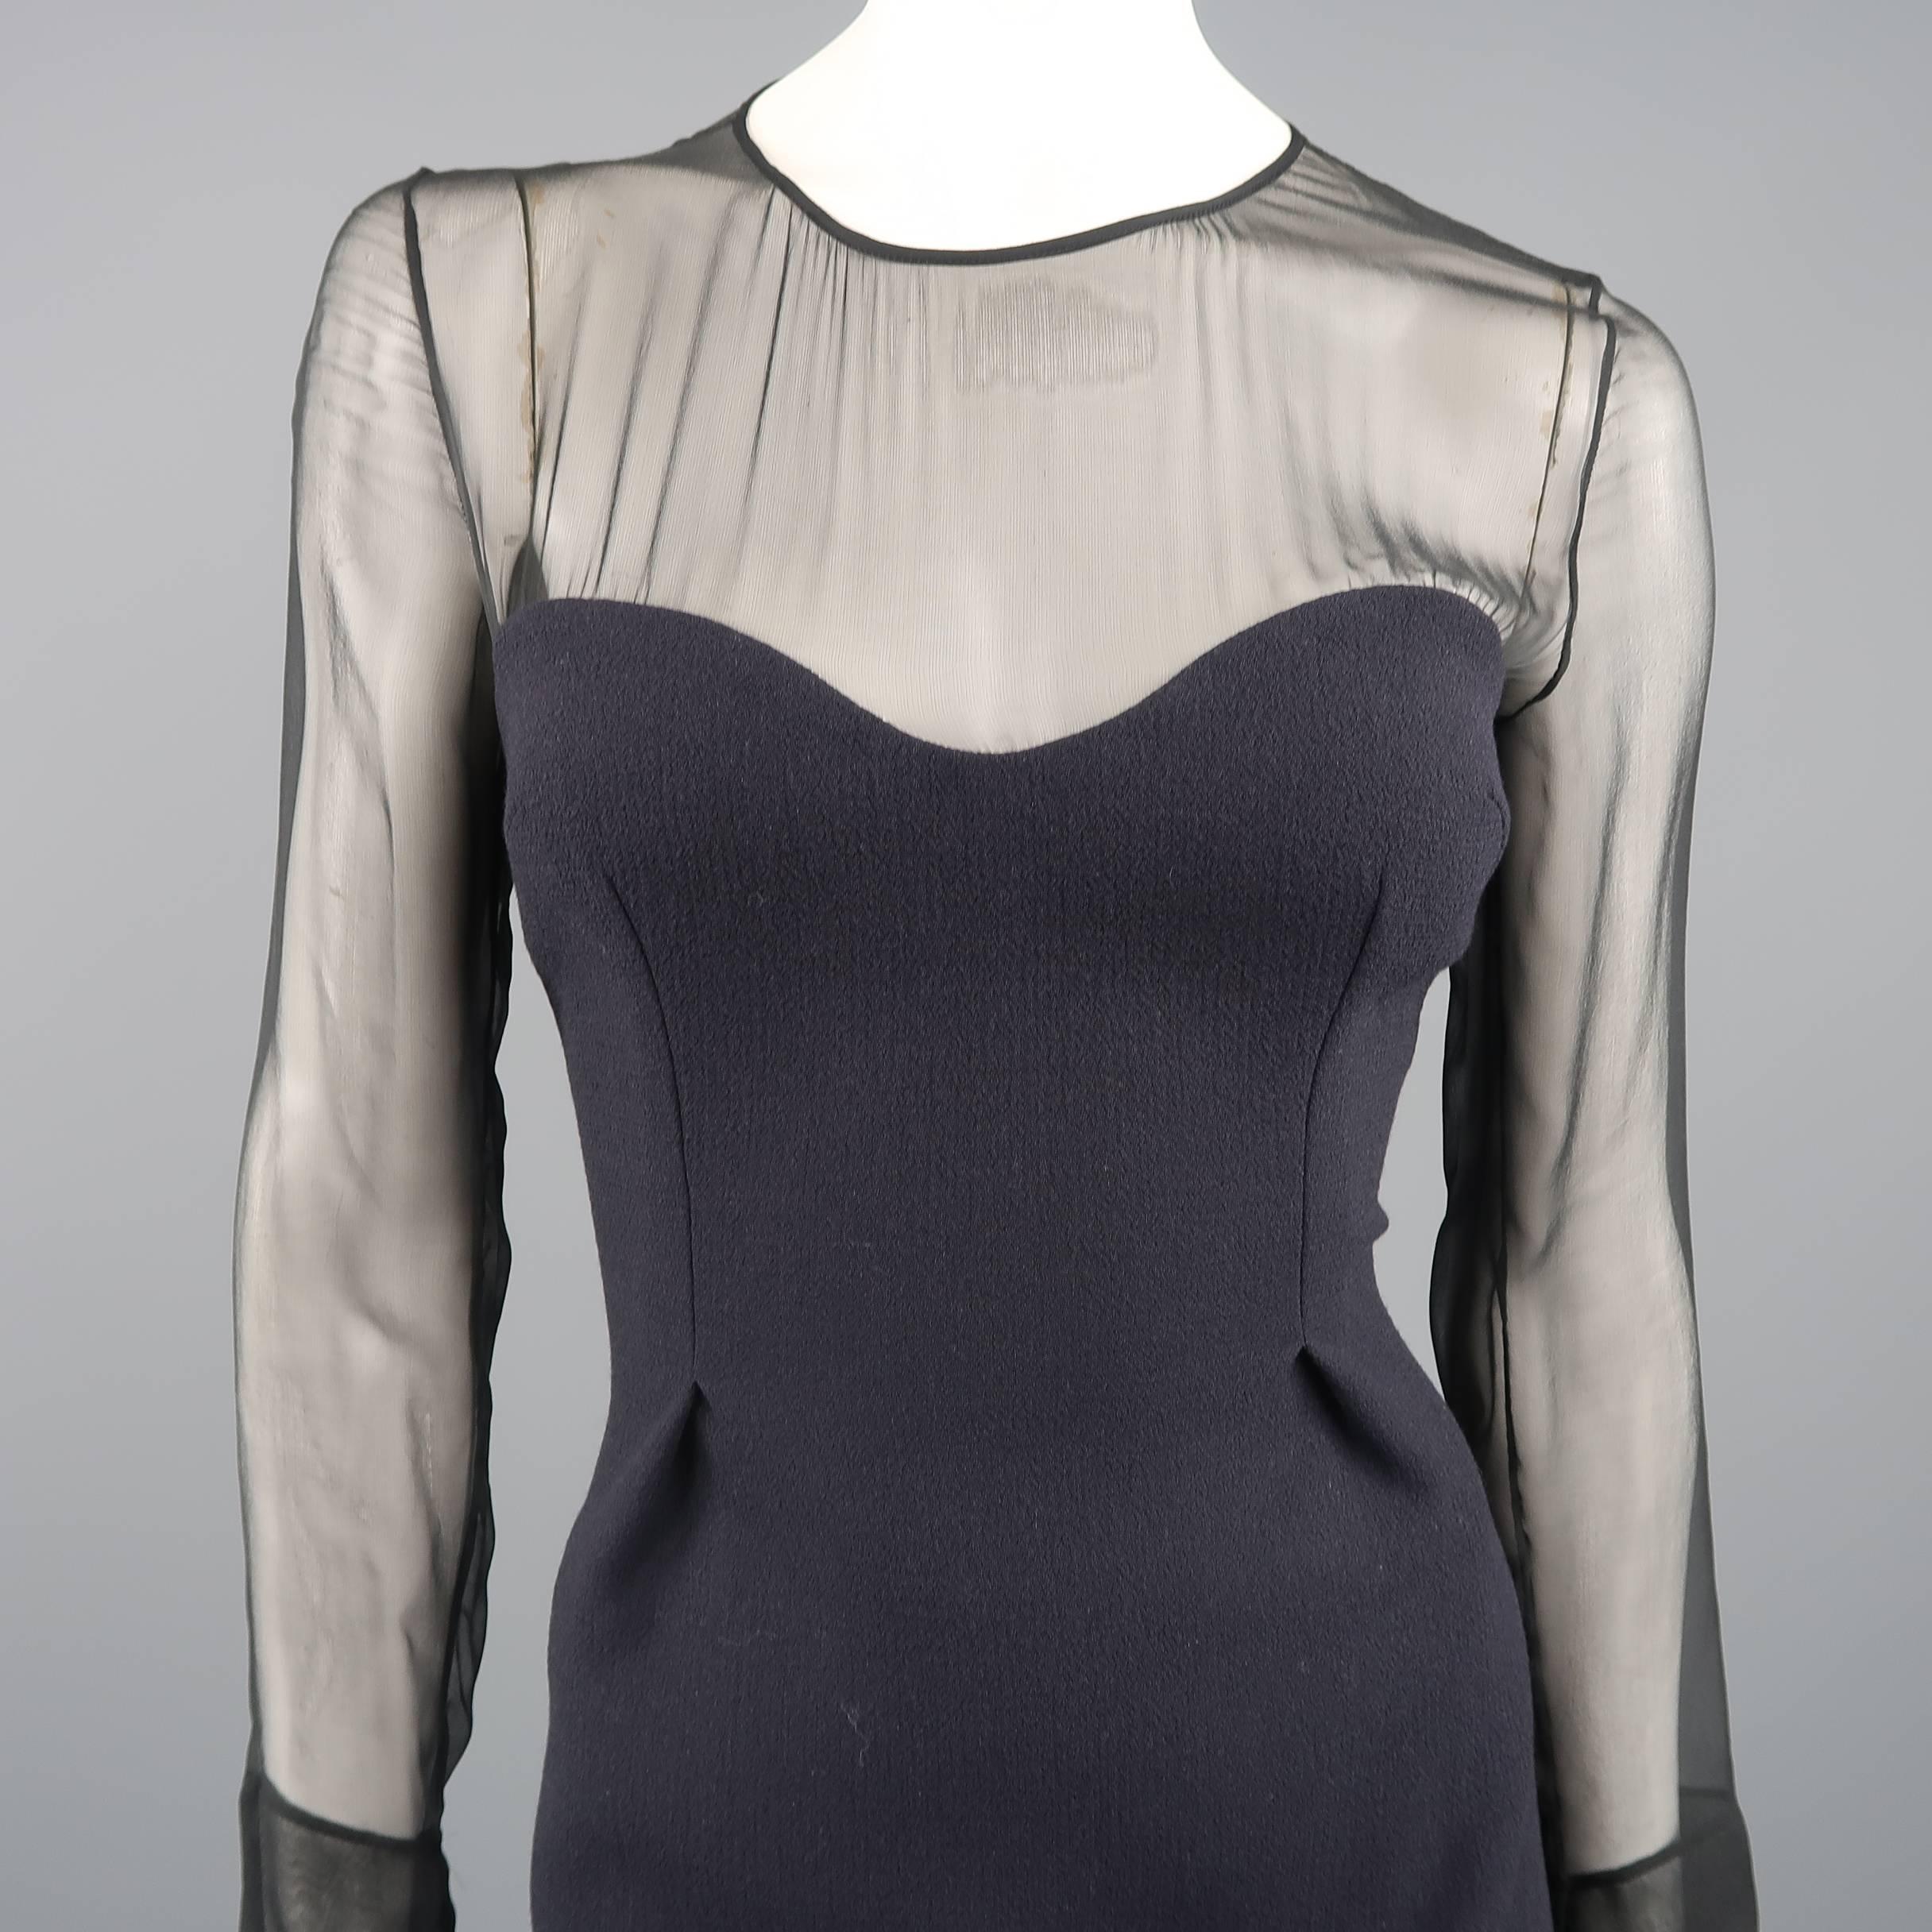 PRADA cocktail dress features a textured navy blue wool body with a sweetheart neckline, pleated front, and black sheer chiffon long sleeve top. Made in Italy.
 
Excellent Pre-Owned Condition.
Marked: IT 42
 
Measurements:
 
Shoulder: 15 in.
Bust: